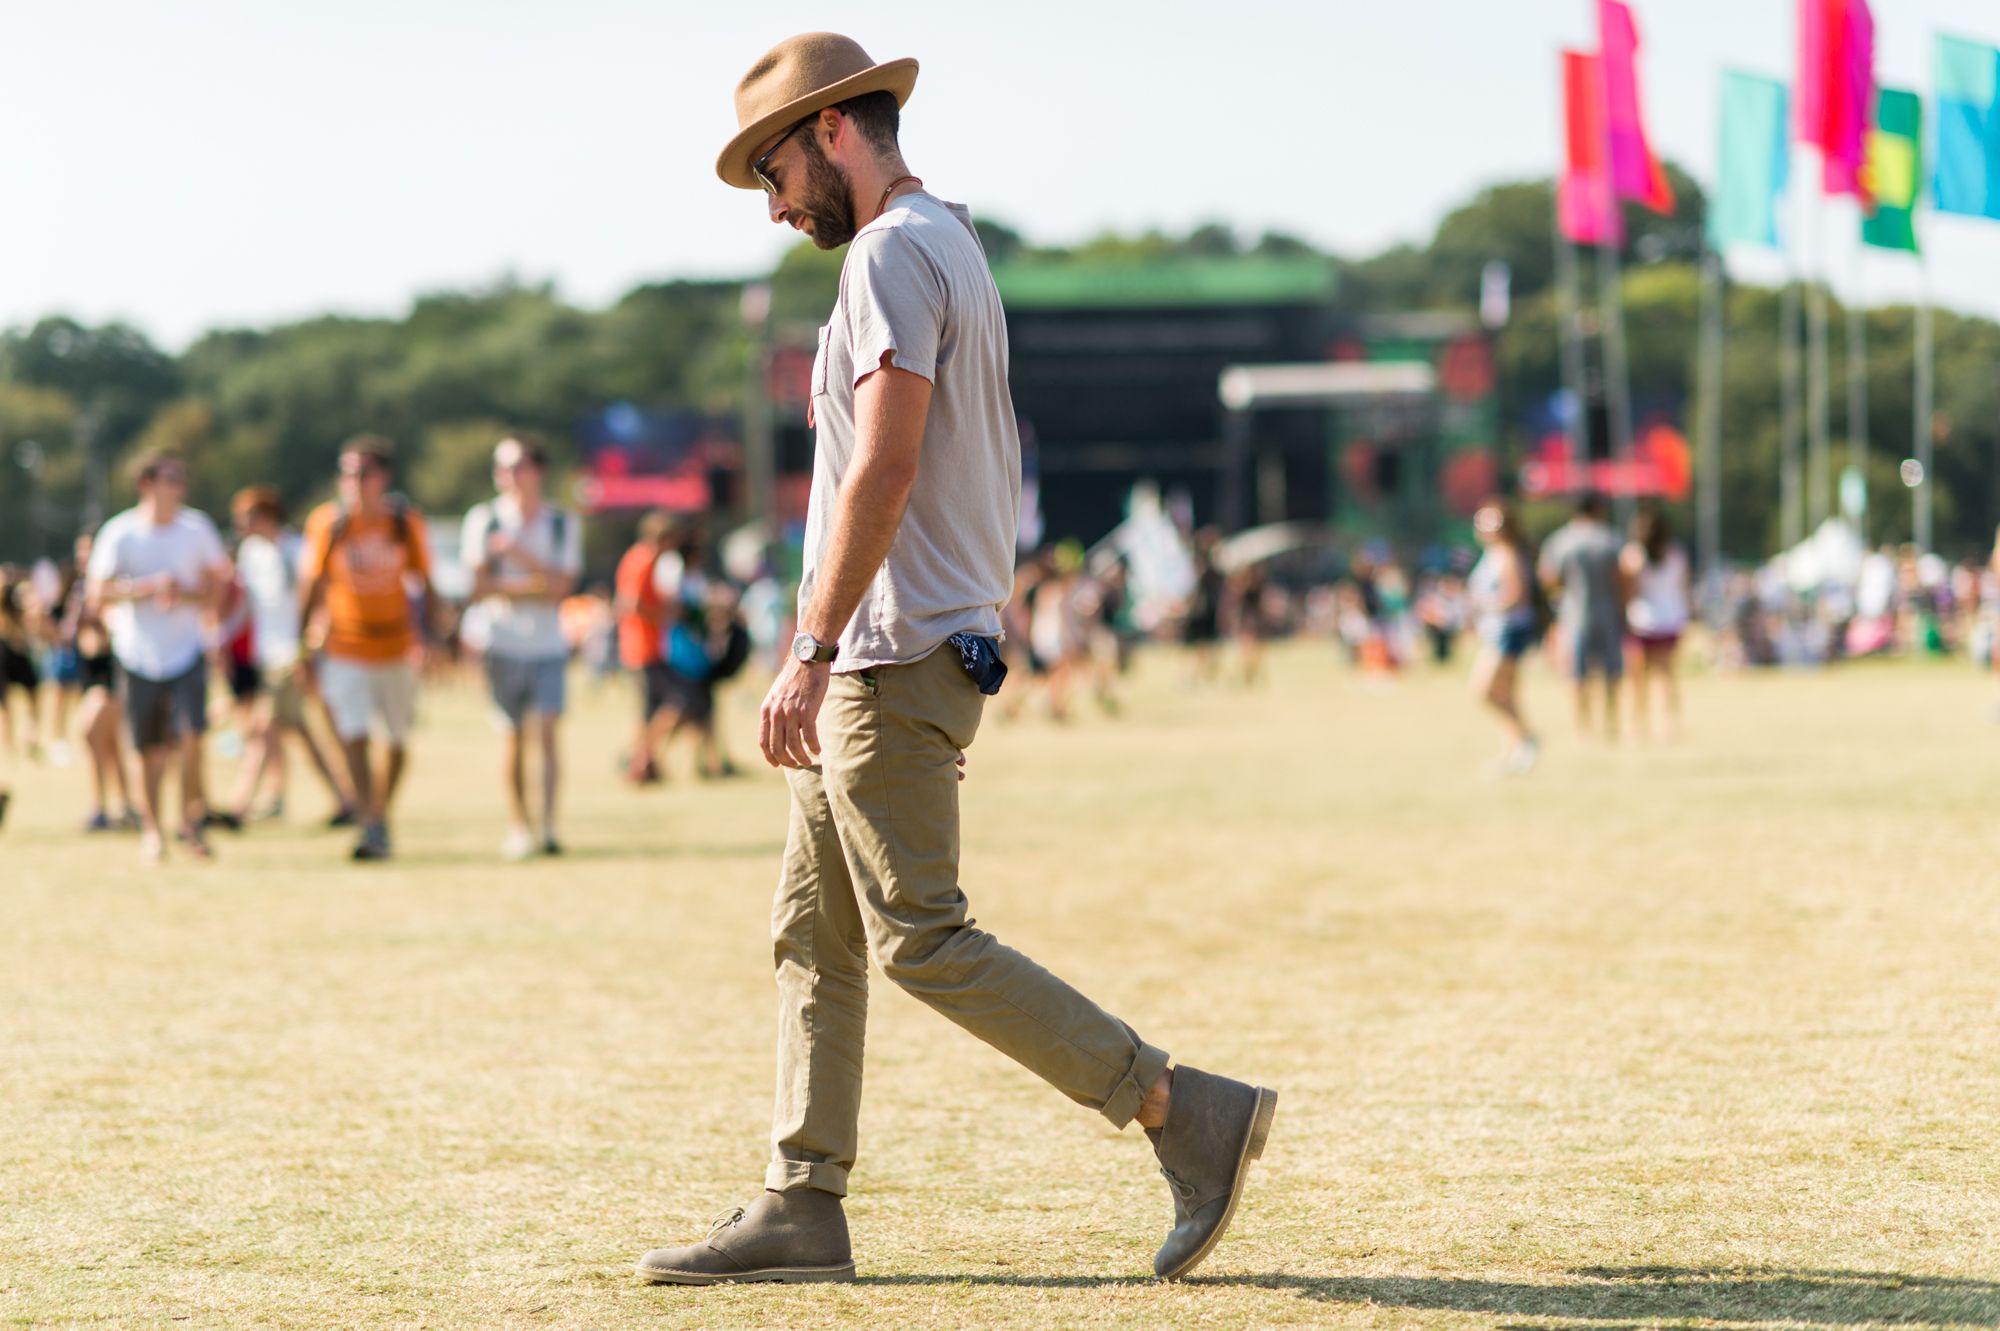 The Best Street Style from Austin City Limits